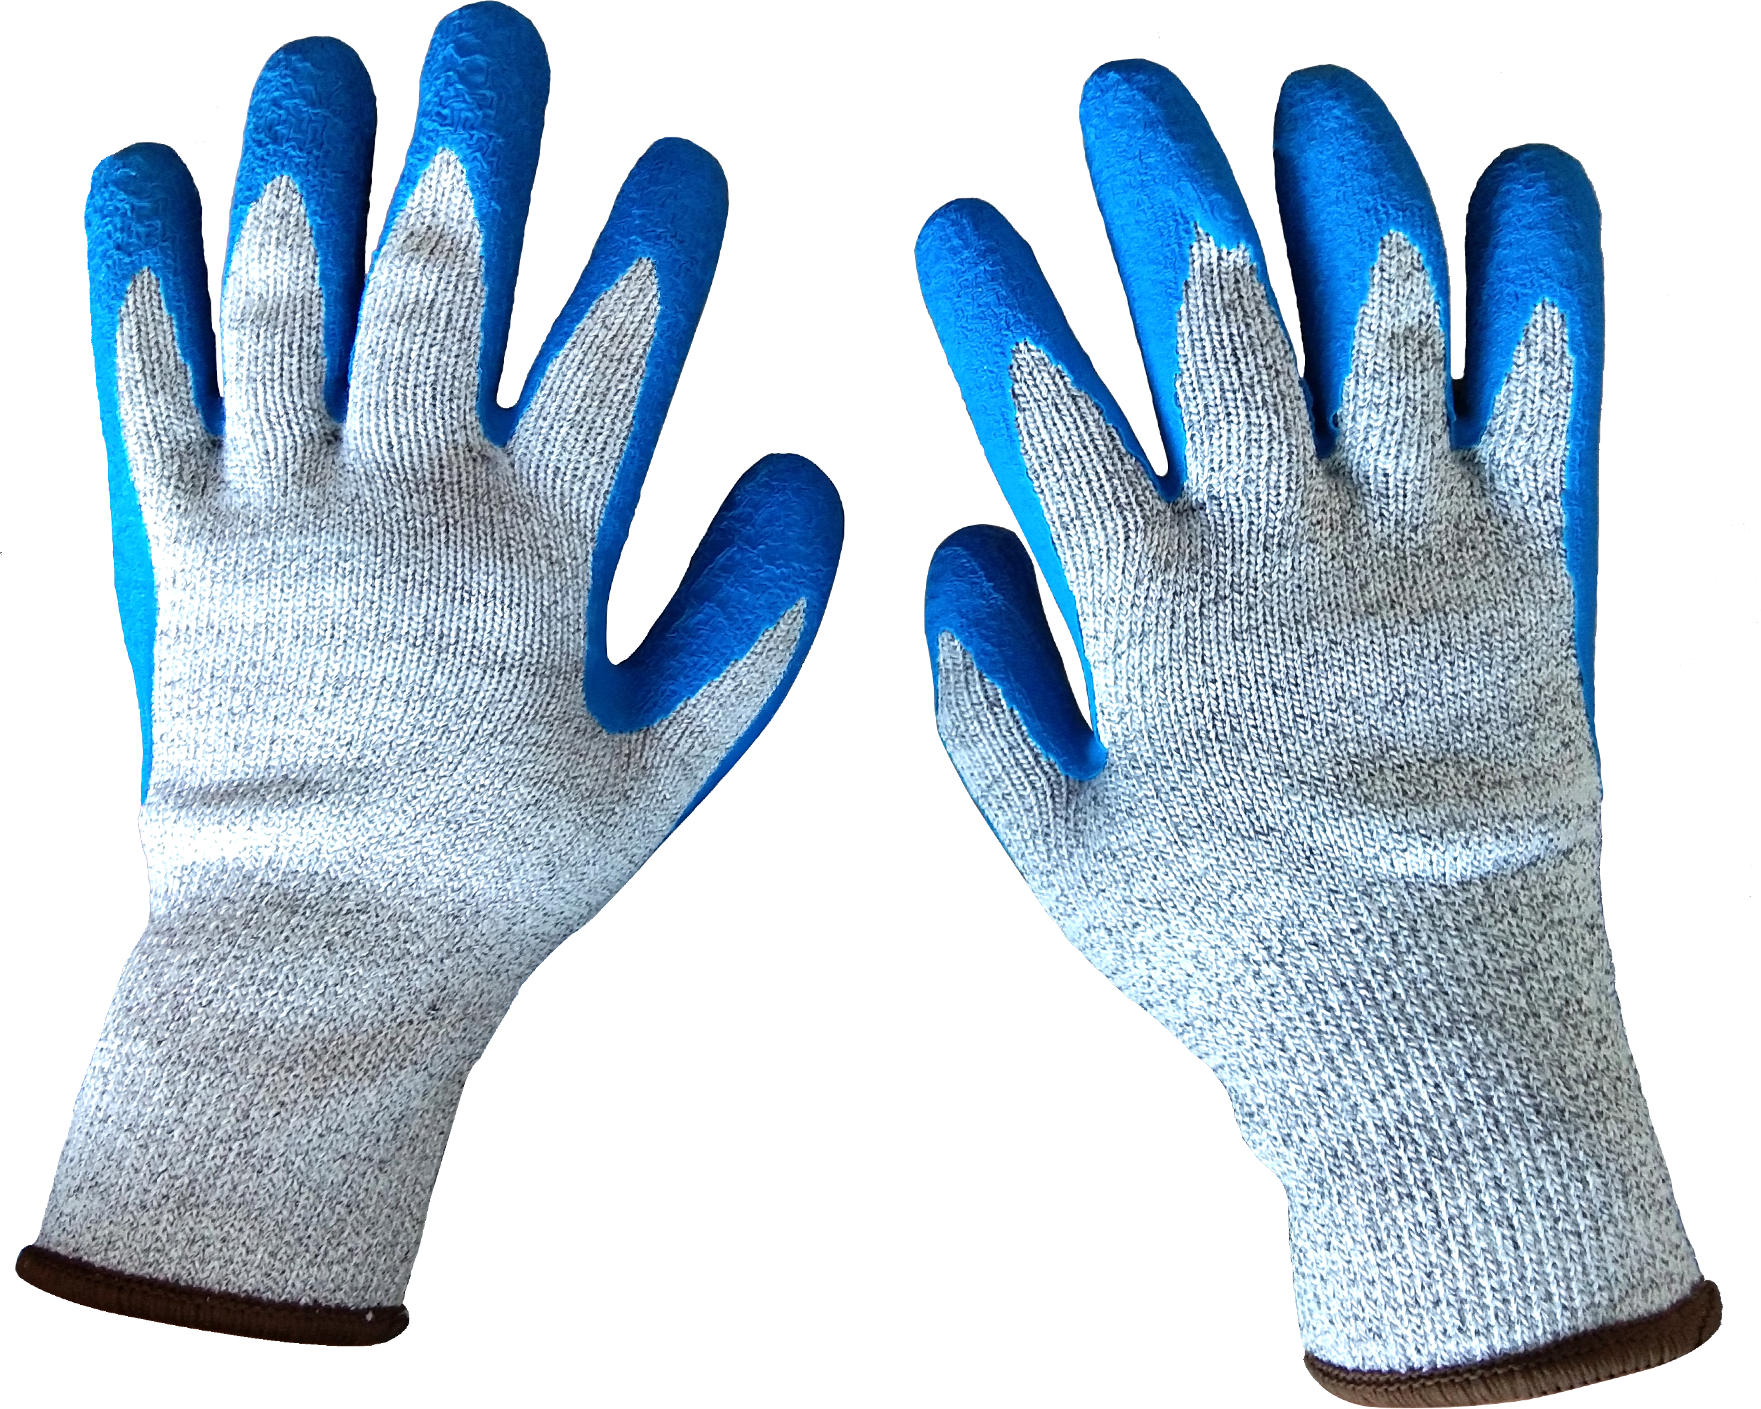 Performance and Precautions of Anti-Cutting Gloves